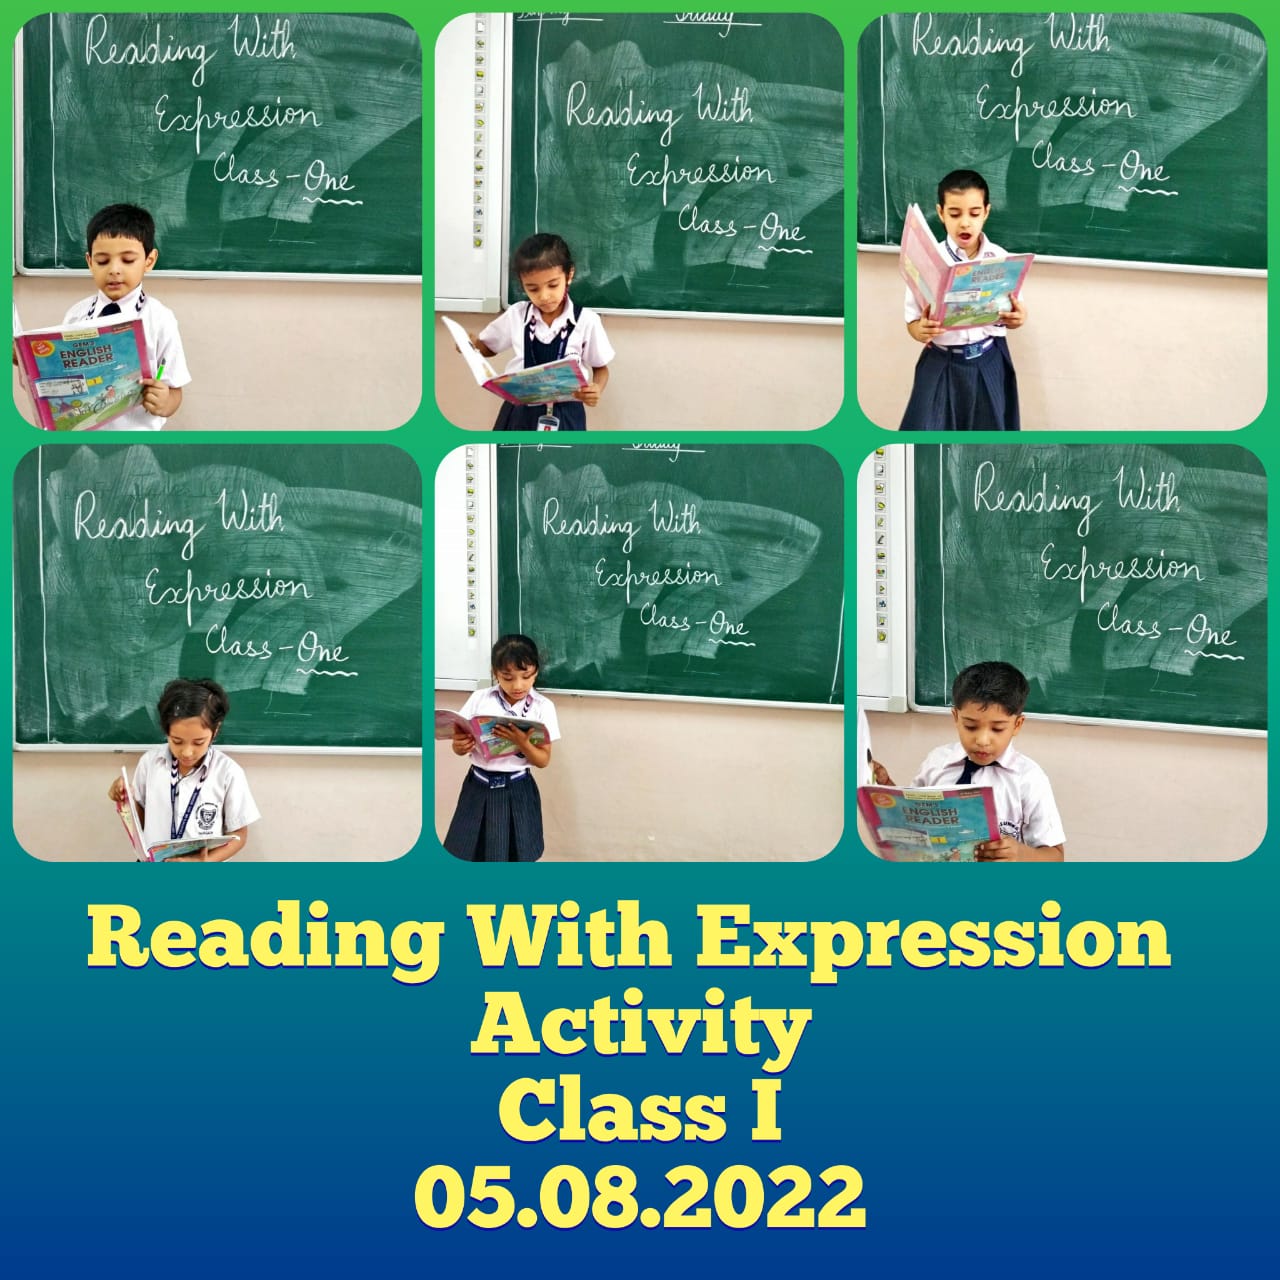 READING WITH EXPRESSION ACTIVITY